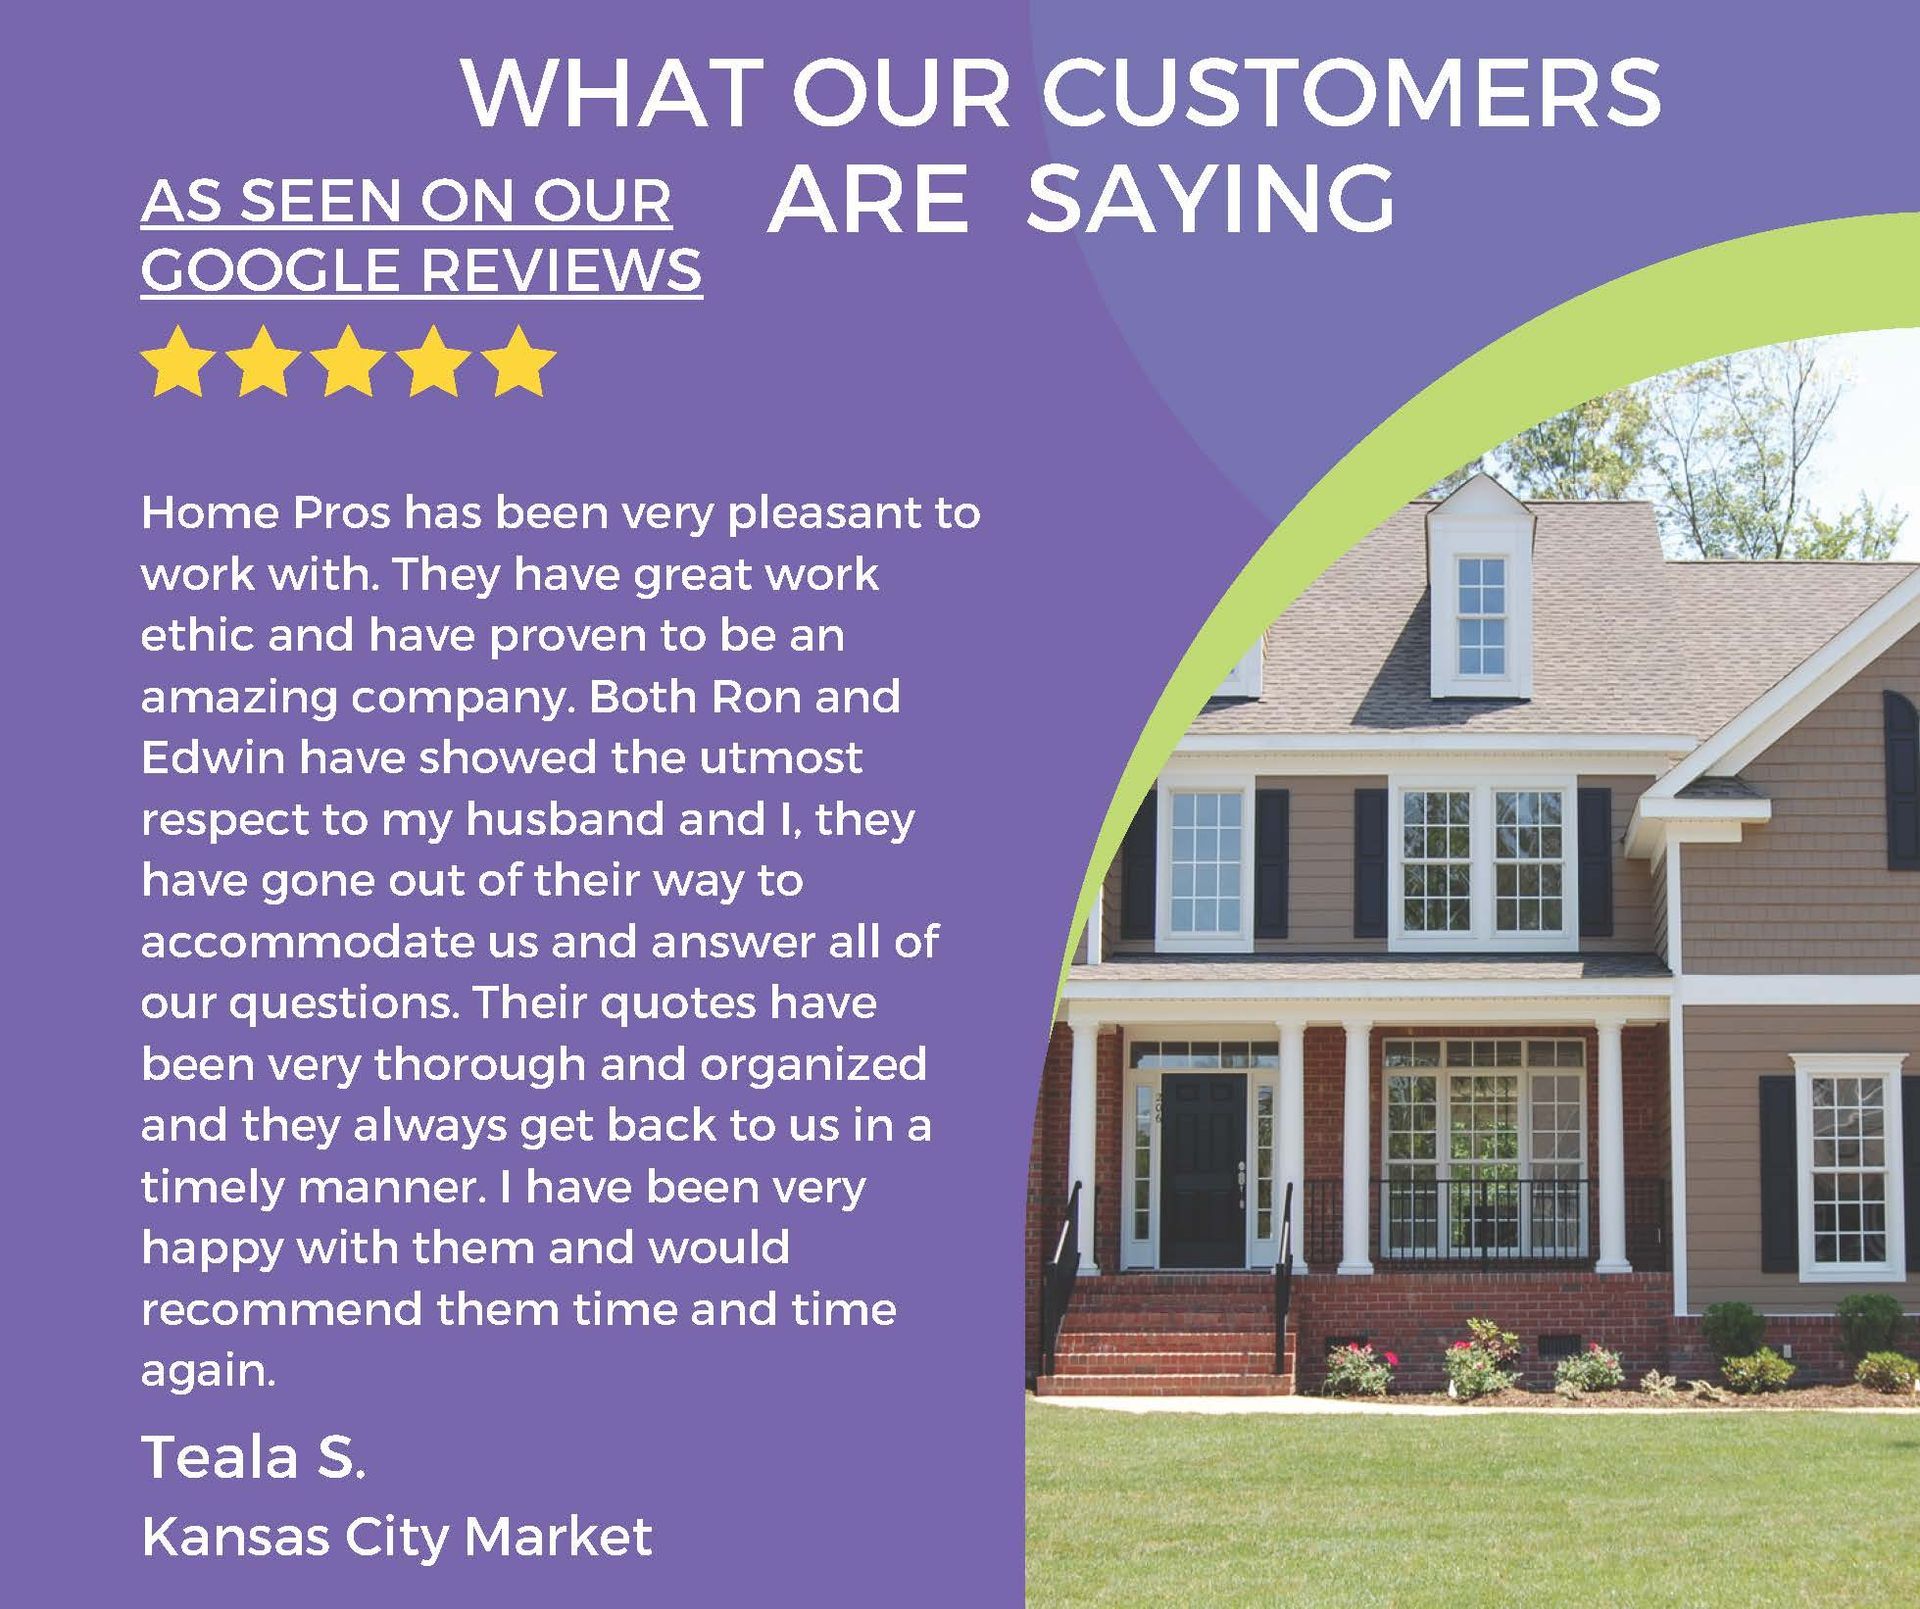 google 5 star review left by teala s for home pros painting for house painting and raved about thorough quotes